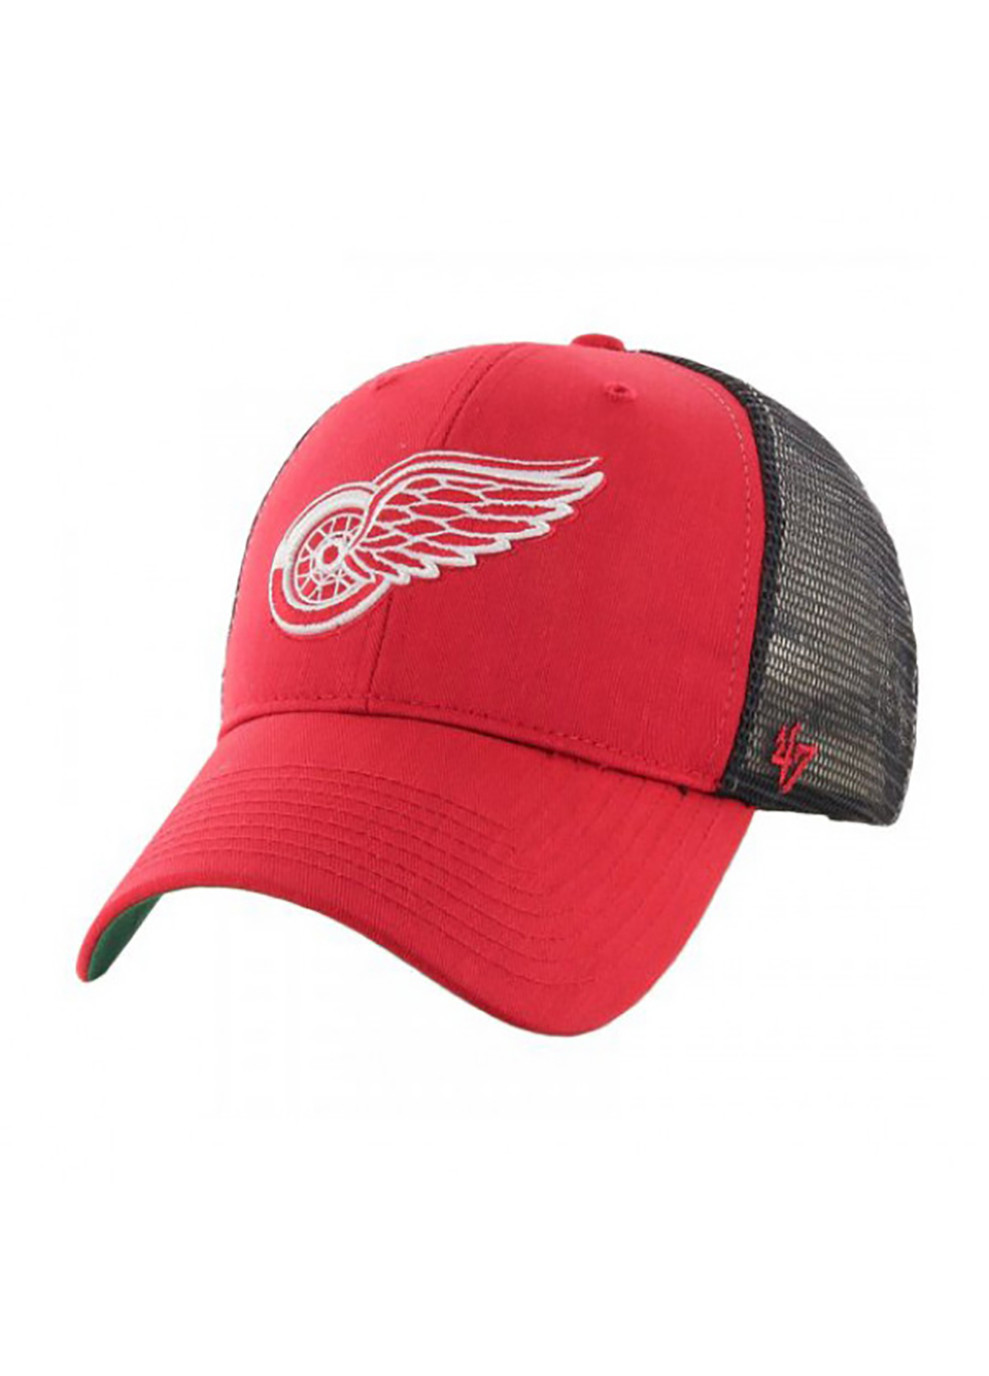 Кепка-тракер DETROIT RED WINGS RED BRANSON One Size Red/Black/White/Green 47 Brand (258131711)